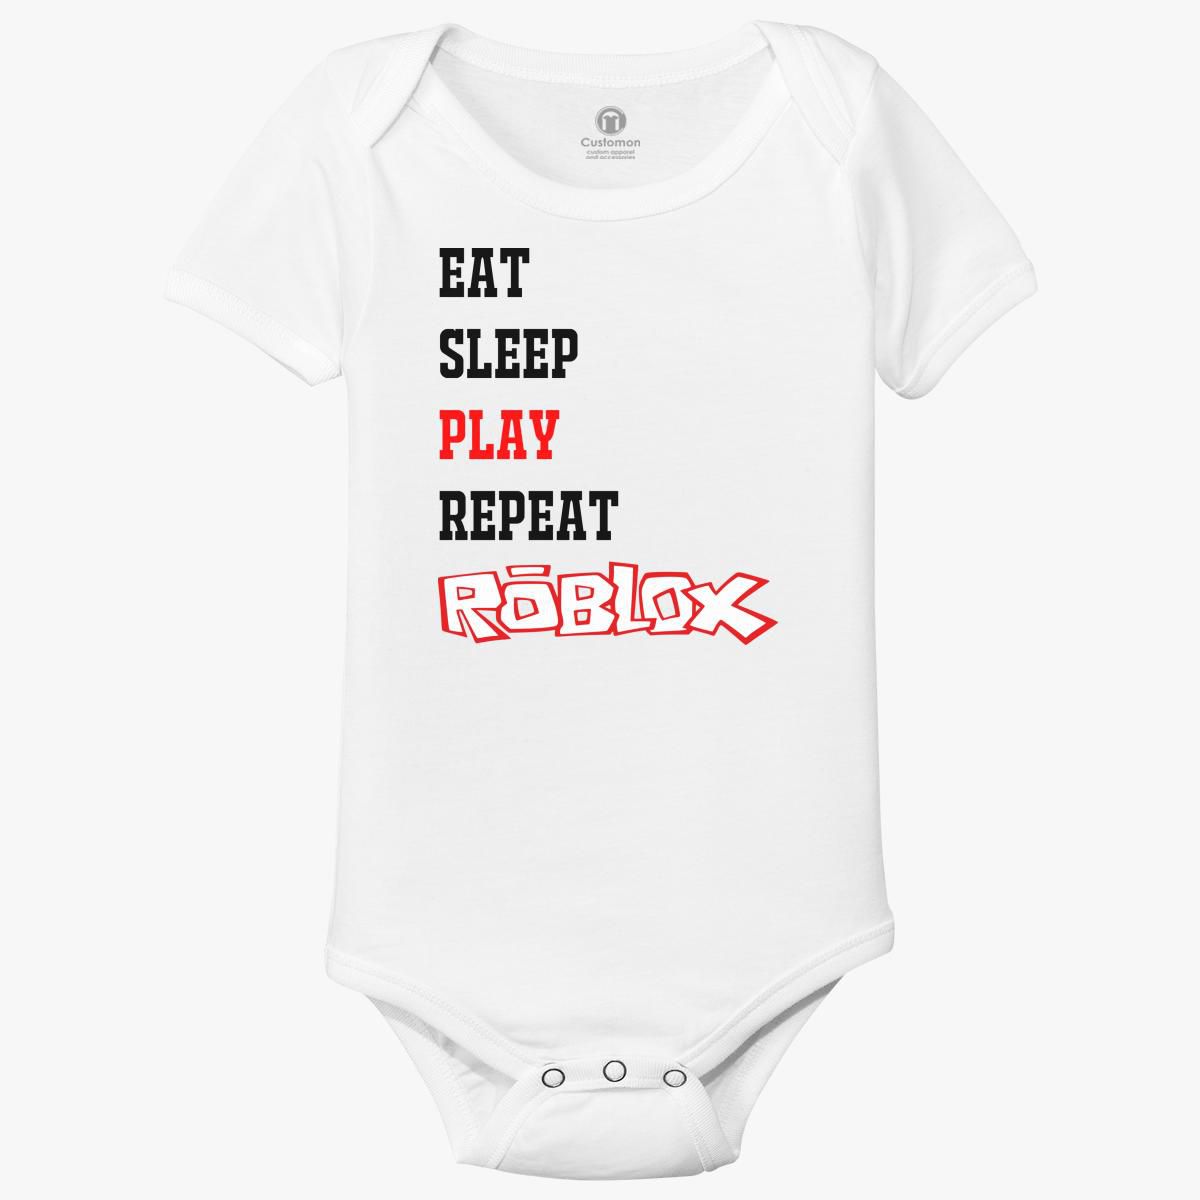 Cute Baby Outfits Codes For Bloxburg